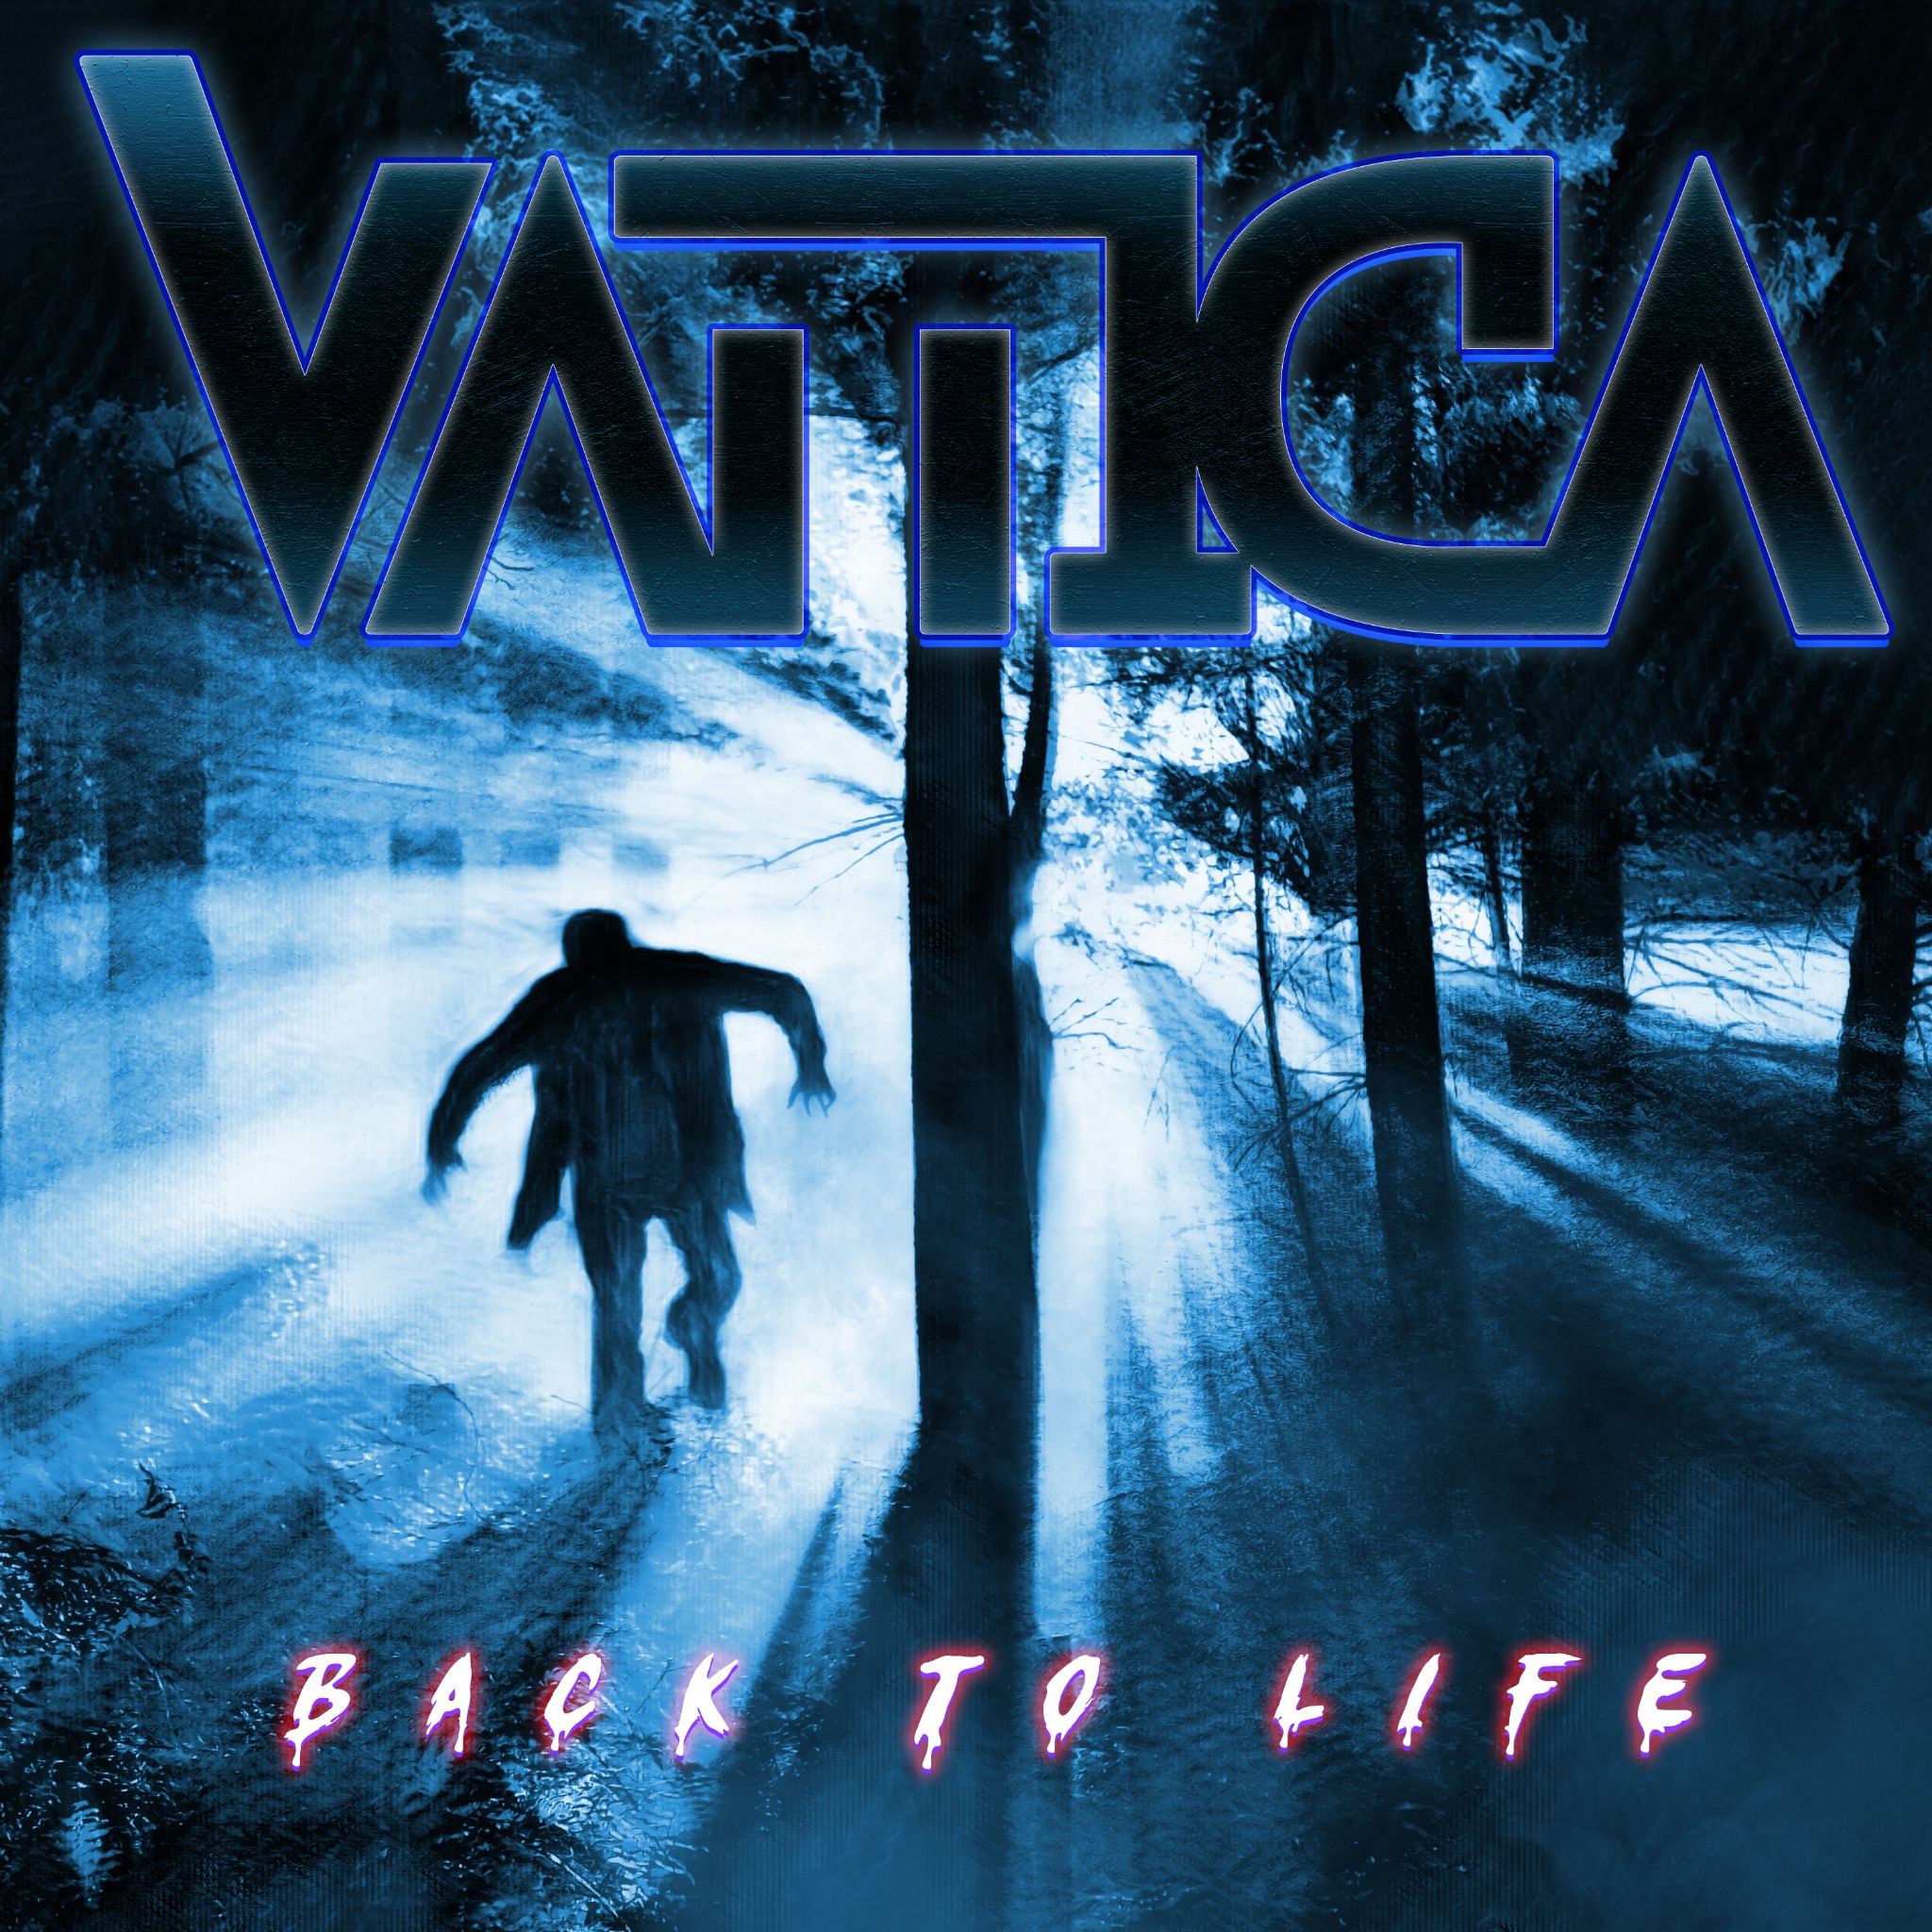 Artwork for the single “Back to Life” by VATTICA